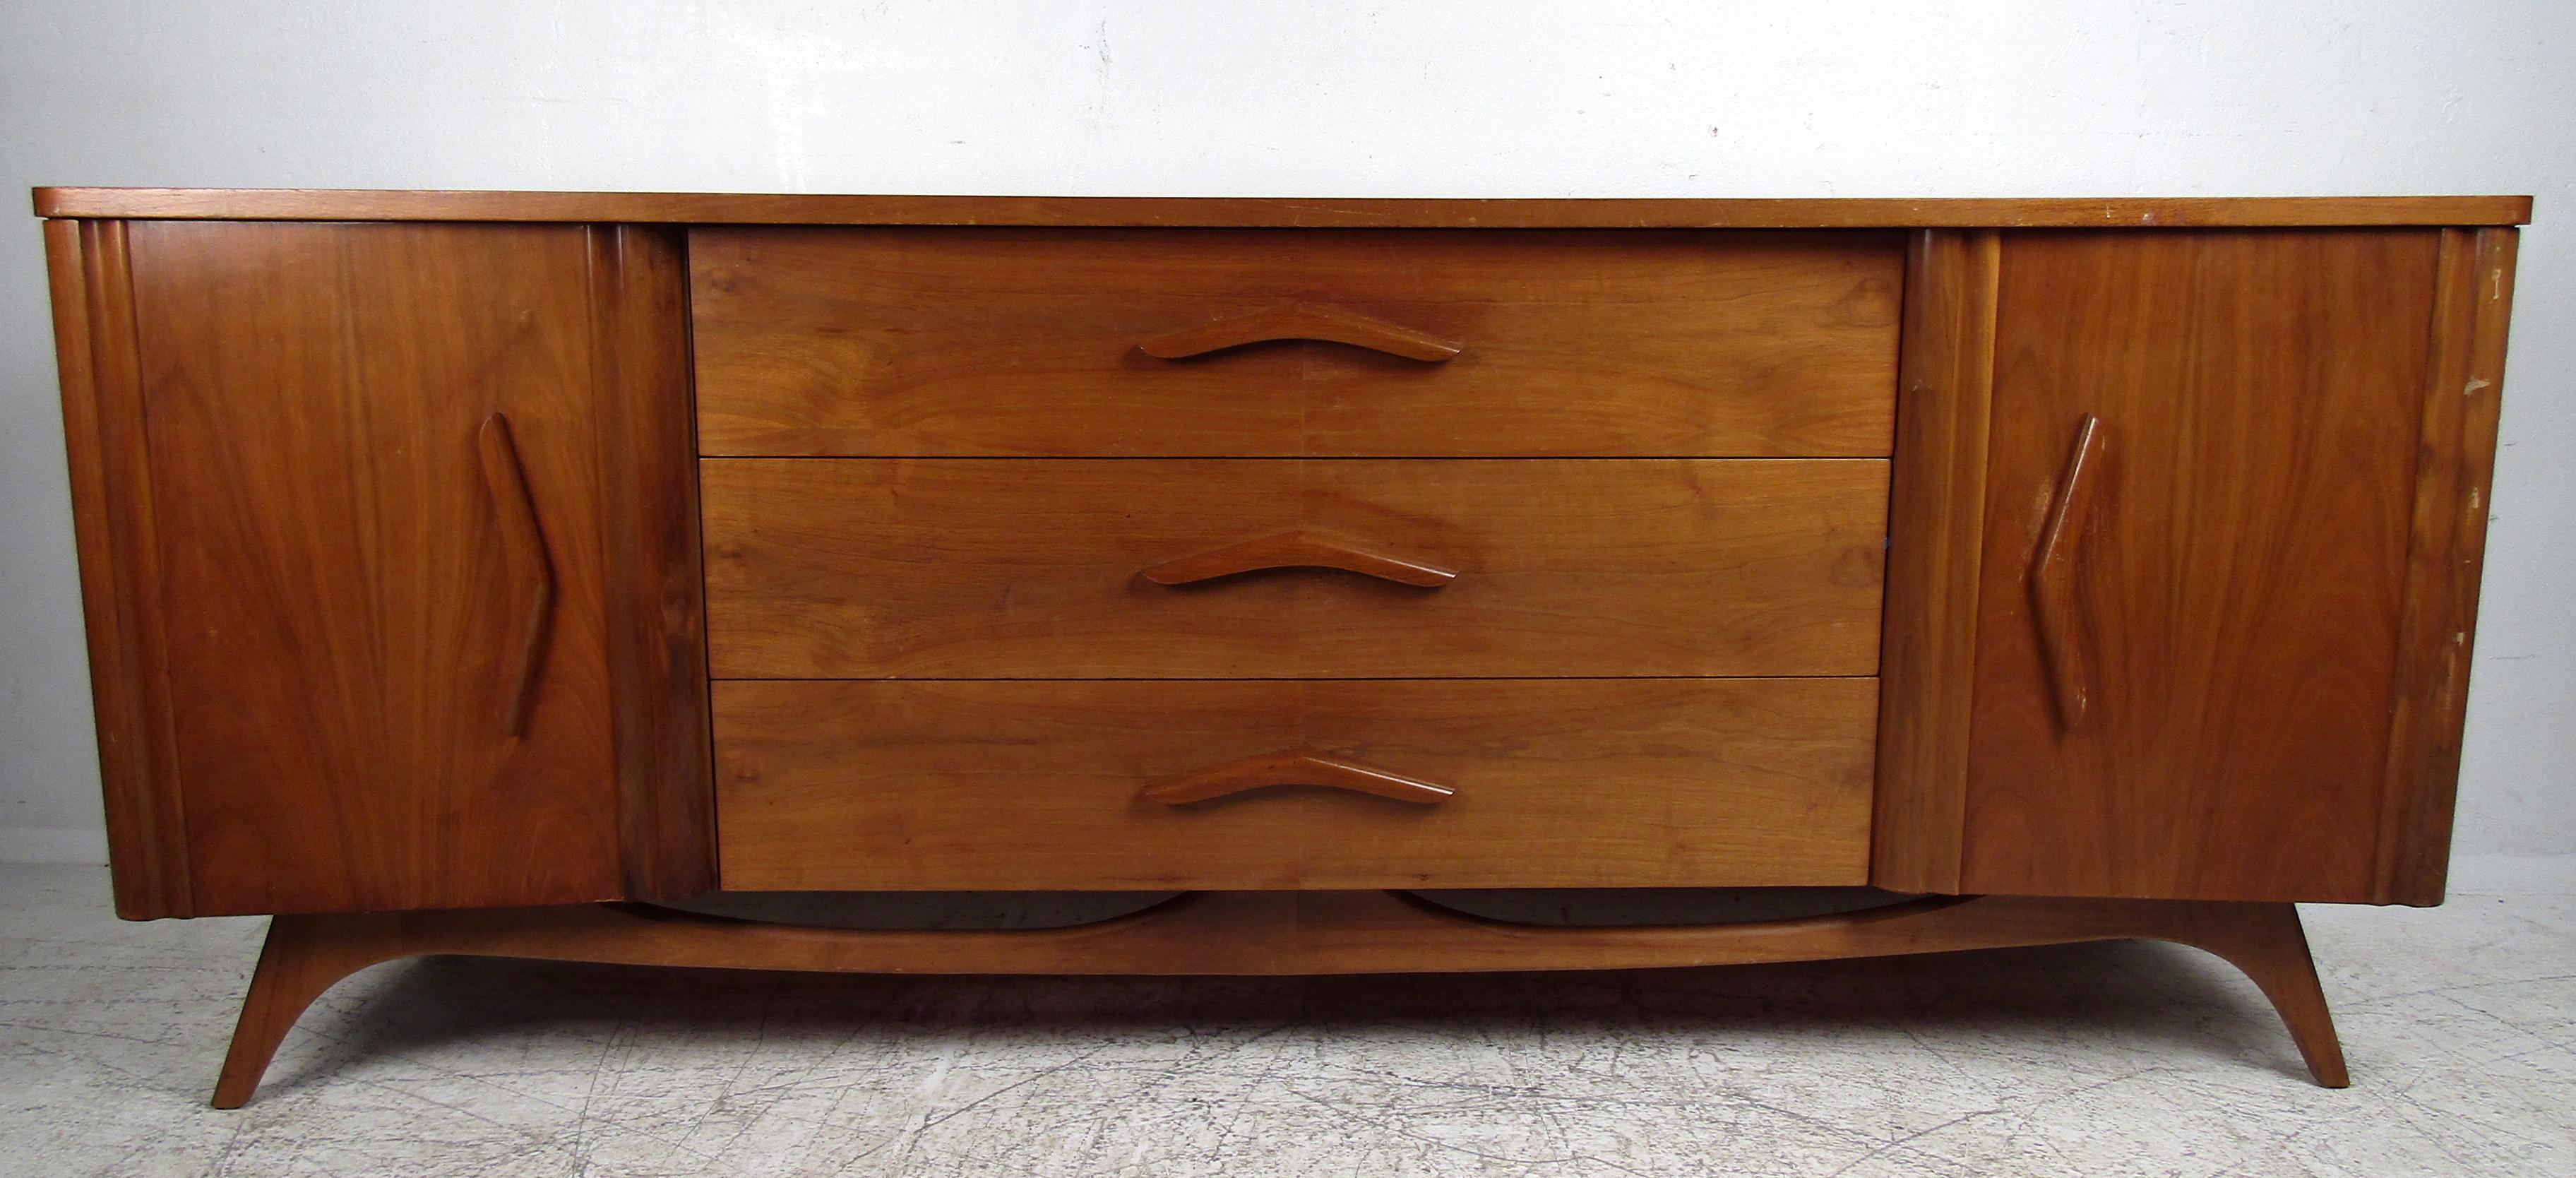 Sleek Mid-Century Modern lowboy dresser featuring three large spacious drawers with sculpted pulls, six hidden drawers, on a set of sturdy legs in rich walnut grain.

Please confirm the item location (NY or NJ).
  